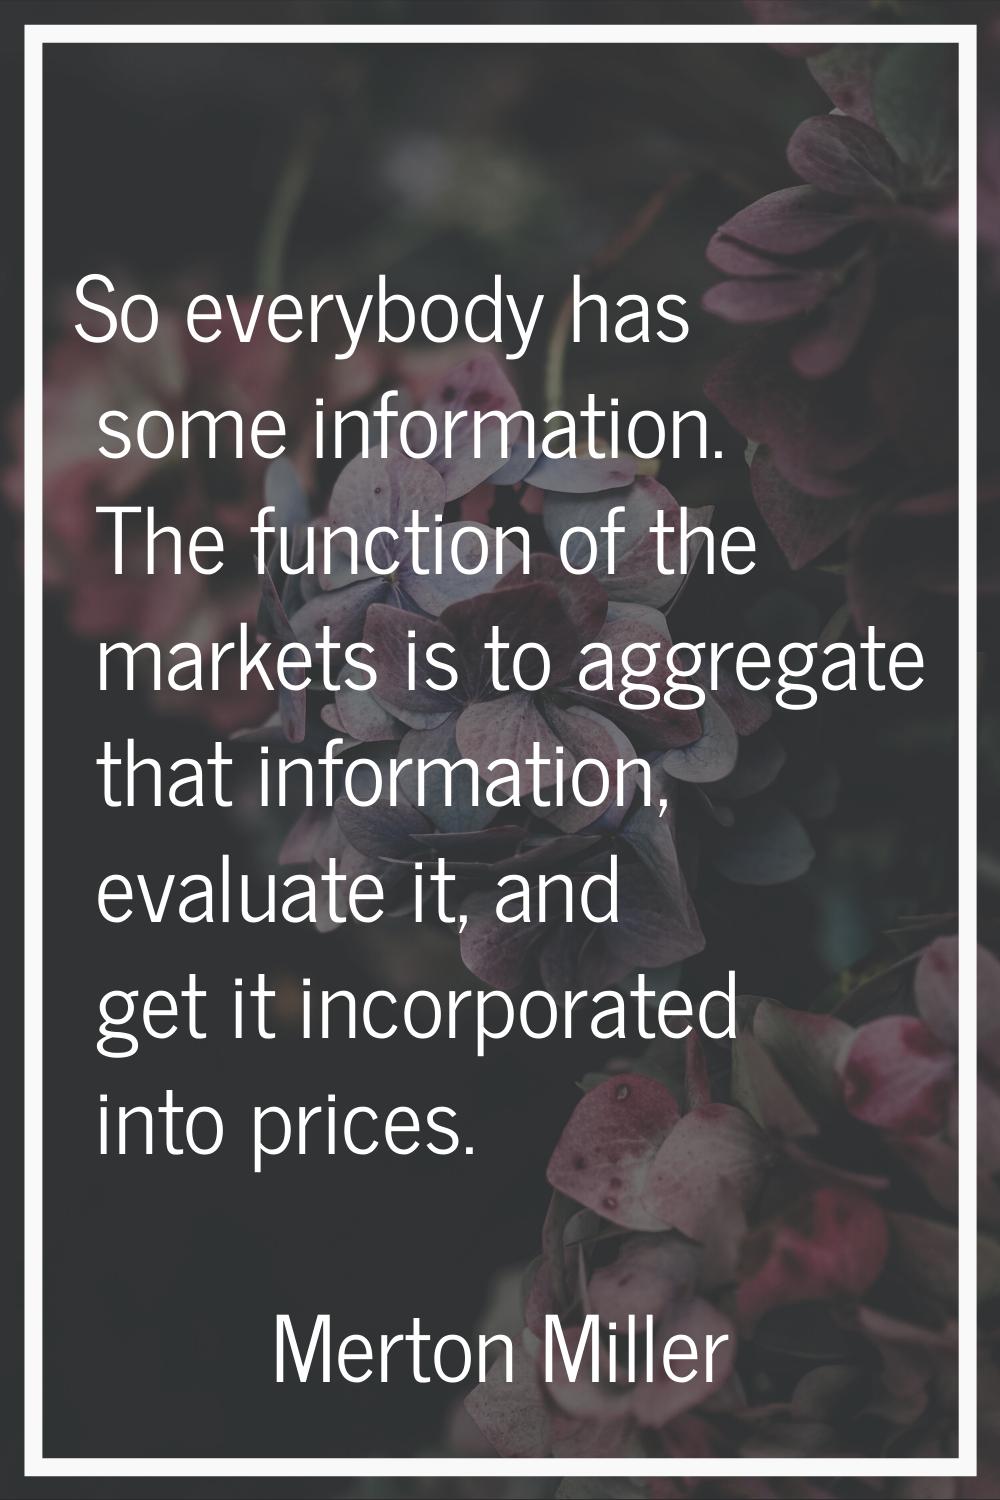 So everybody has some information. The function of the markets is to aggregate that information, ev